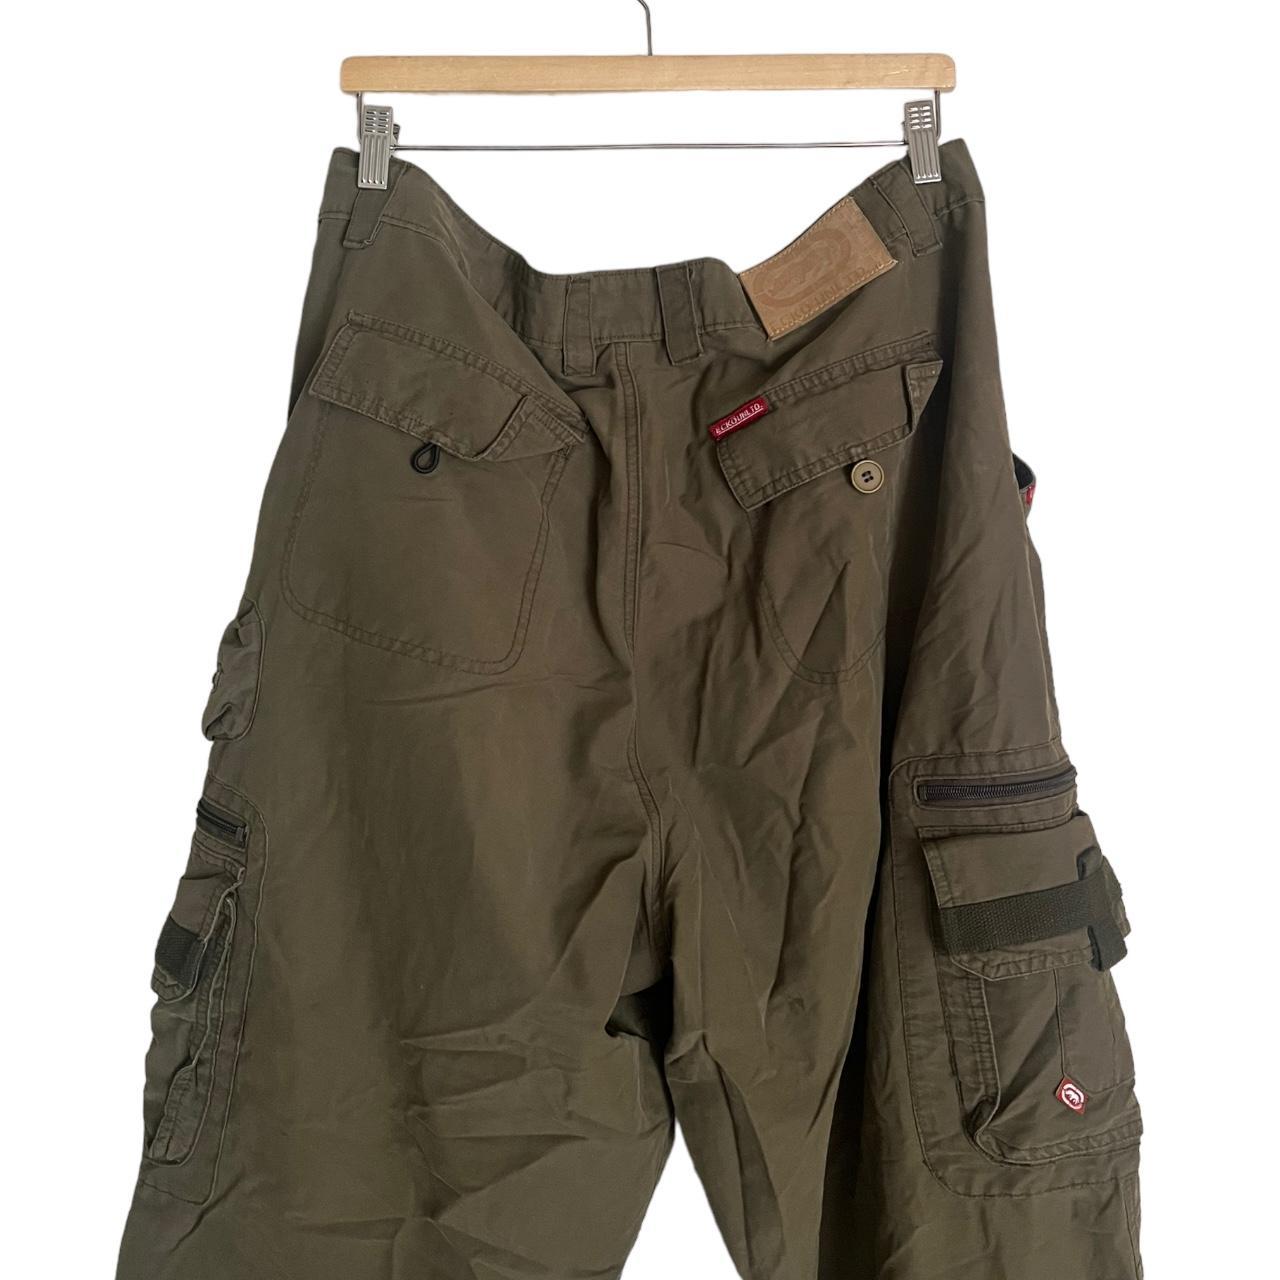 Vintage Baggy Cargo Pants from Ecko Unlimited in...